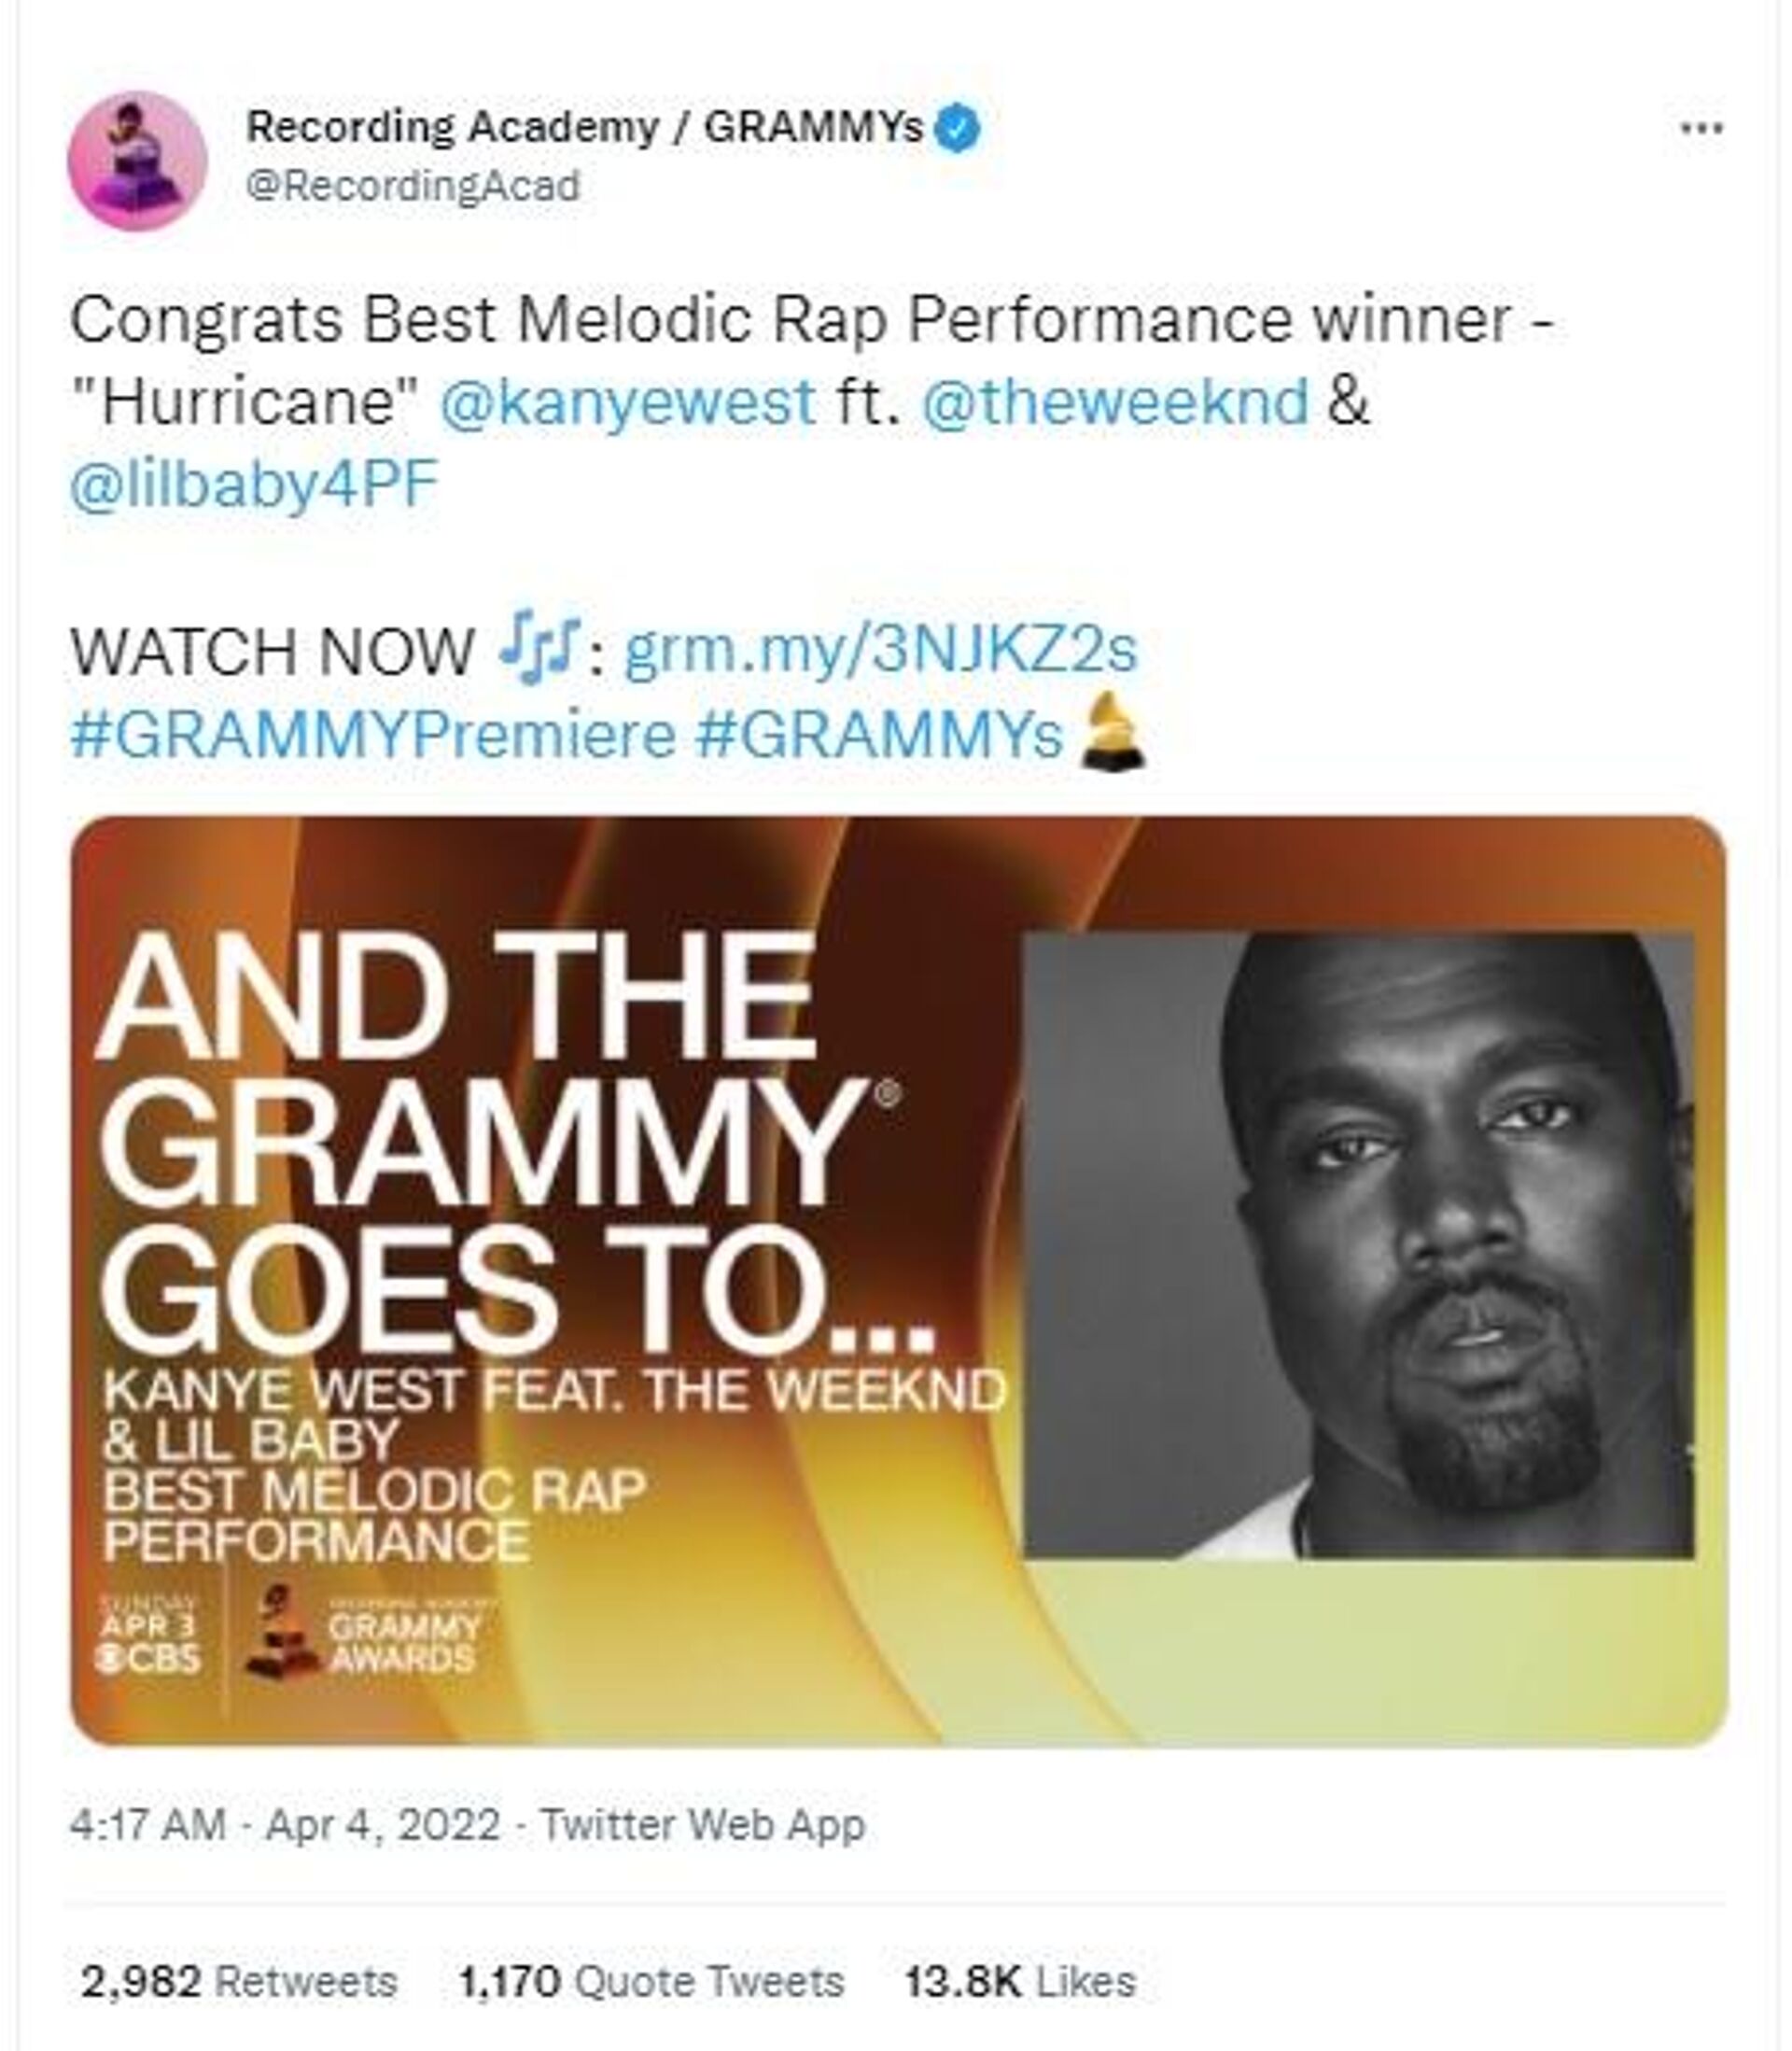 Rapper Kanye West wins two Grammy Awards despite being barred from performing at the musical gala - Sputnik International, 1920, 04.04.2022